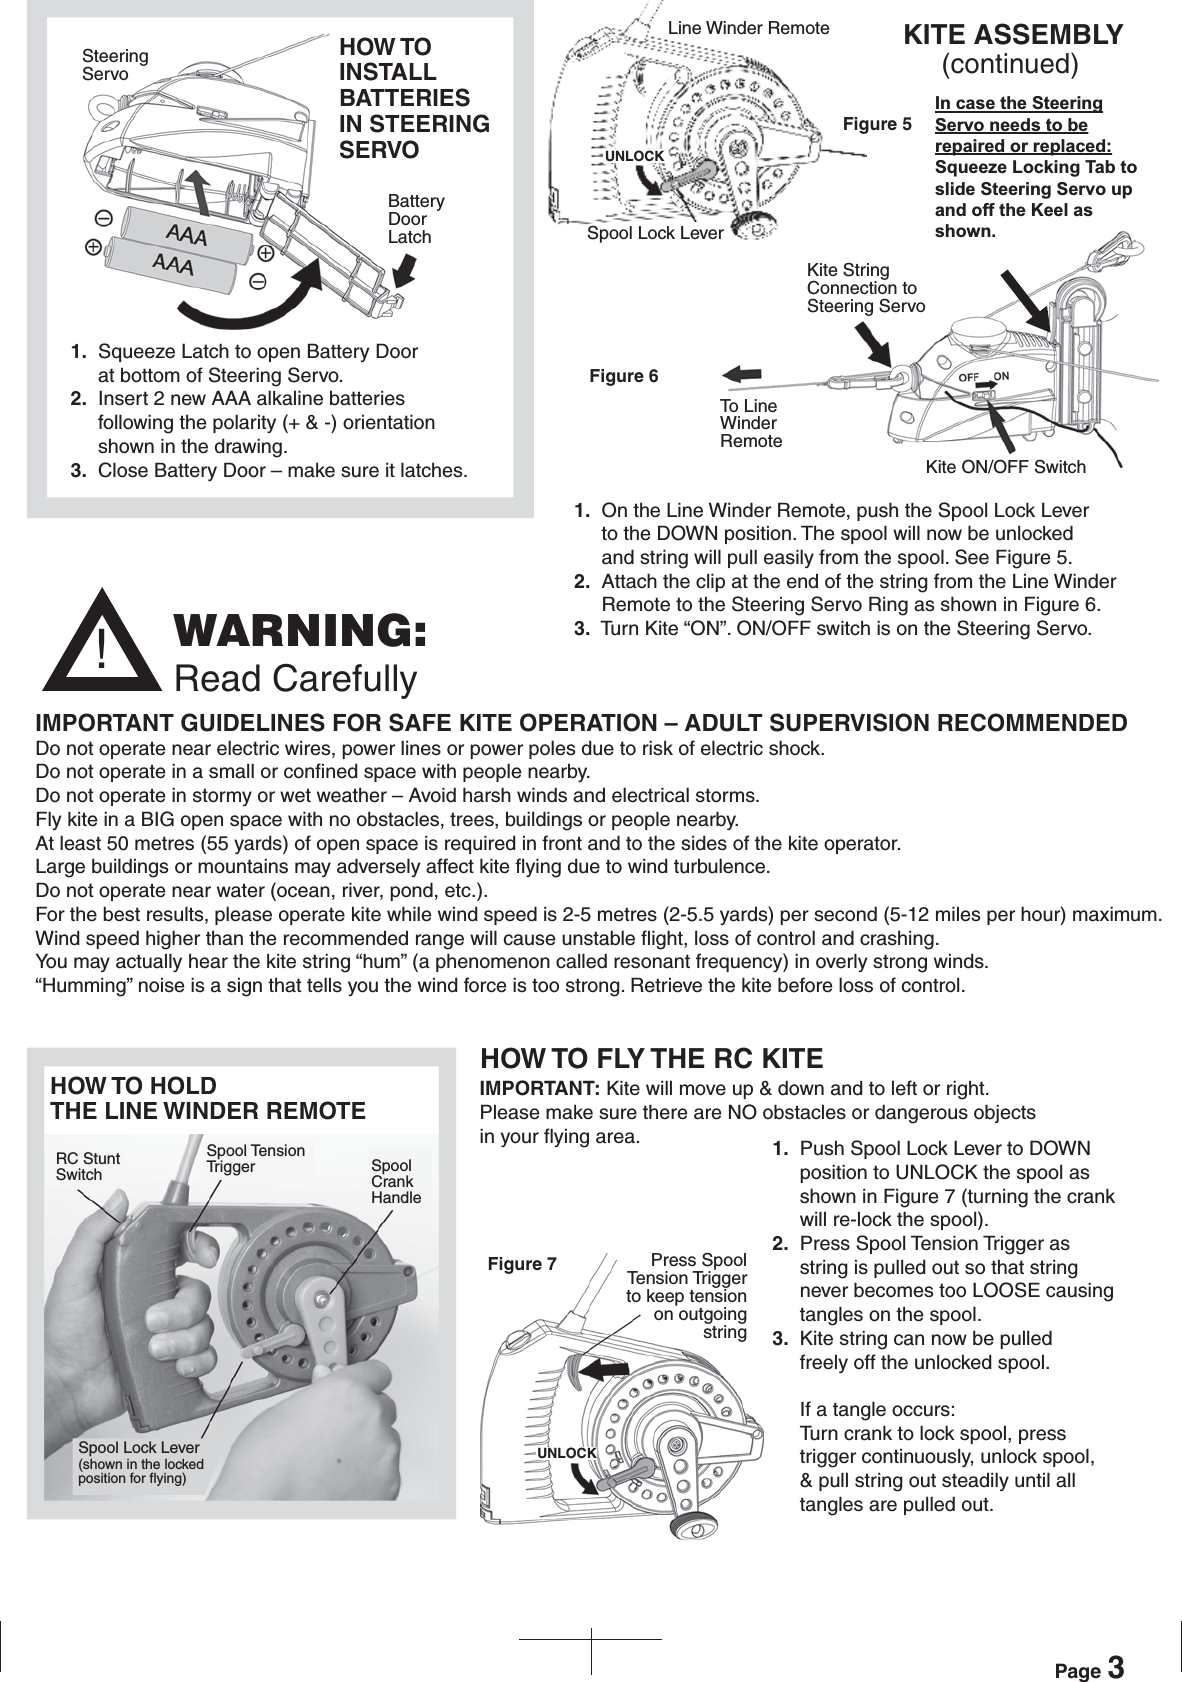 WARNING:Read Carefully!1.  On the Line Winder Remote, push the Spool Lock Lever      to the DOWN position. The spool will now be unlocked      and string will pull easily from the spool. See Figure 5. 2.  Attach the clip at the end of the string from the Line Winder     Remote to the Steering Servo Ring as shown in Figure 6.3.  Turn Kite “ON”. ON/OFF switch is on the Steering Servo.IMPORTANT: Kite will move up &amp; down and to left or right.  Please make sure there are NO obstacles or dangerous objects in your flying area.HOW TO FLY THE RC KITEHOW TO HOLD THE LINE WINDER REMOTEFigure 7IMPORTANT GUIDELINES FOR SAFE KITE OPERATION – ADULT SUPERVISION RECOMMENDEDDo not operate near electric wires, power lines or power poles due to risk of electric shock.Do not operate in a small or confined space with people nearby.Do not operate in stormy or wet weather – Avoid harsh winds and electrical storms.Fly kite in a BIG open space with no obstacles, trees, buildings or people nearby.At least 50 metres (55 yards) of open space is required in front and to the sides of the kite operator.  Large buildings or mountains may adversely affect kite flying due to wind turbulence.Do not operate near water (ocean, river, pond, etc.).For the best results, please operate kite while wind speed is 2-5 metres (2-5.5 yards) per second (5-12 miles per hour) maximum.Wind speed higher than the recommended range will cause unstable flight, loss of control and crashing.You may actually hear the kite string “hum” (a phenomenon called resonant frequency) in overly strong winds.“Humming” noise is a sign that tells you the wind force is too strong. Retrieve the kite before loss of control. 1.  Squeeze Latch to open Battery Door      at bottom of Steering Servo.2.  Insert 2 new AAA alkaline batteries     following the polarity (+ &amp; -) orientation     shown in the drawing.3.  Close Battery Door – make sure it latches.HOW TO INSTALL BATTERIESIN STEERING SERVOFigure 5Figure 61.  Push Spool Lock Lever to DOWN      position to UNLOCK the spool as      shown in Figure 7 (turning the crank     will re-lock the spool).2.  Press Spool Tension Trigger as      string is pulled out so that string      never becomes too LOOSE causing      tangles on the spool.    3.  Kite string can now be pulled      freely off the unlocked spool.If a tangle occurs:Turn crank to lock spool, press trigger continuously, unlock spool, &amp; pull string out steadily until all tangles are pulled out.Page 3SteeringServoBatteryDoorLatchLine Winder RemoteSpool Lock LeverUNLOCKKite StringConnection toSteering ServoTo LineWinderRemoteKite ON/OFF SwitchPress SpoolTension Triggerto keep tensionon outgoingstringUNLOCKRC StuntSwitchSpool TensionTrigger SpoolCrankHandleSpool Lock Lever(shown in the lockedposition for flying)KITE ASSEMBLY      (continued)In case the Steering Servo needs to be repaired or replaced: Squeeze Locking Tab to slide Steering Servo up and off the Keel as shown.